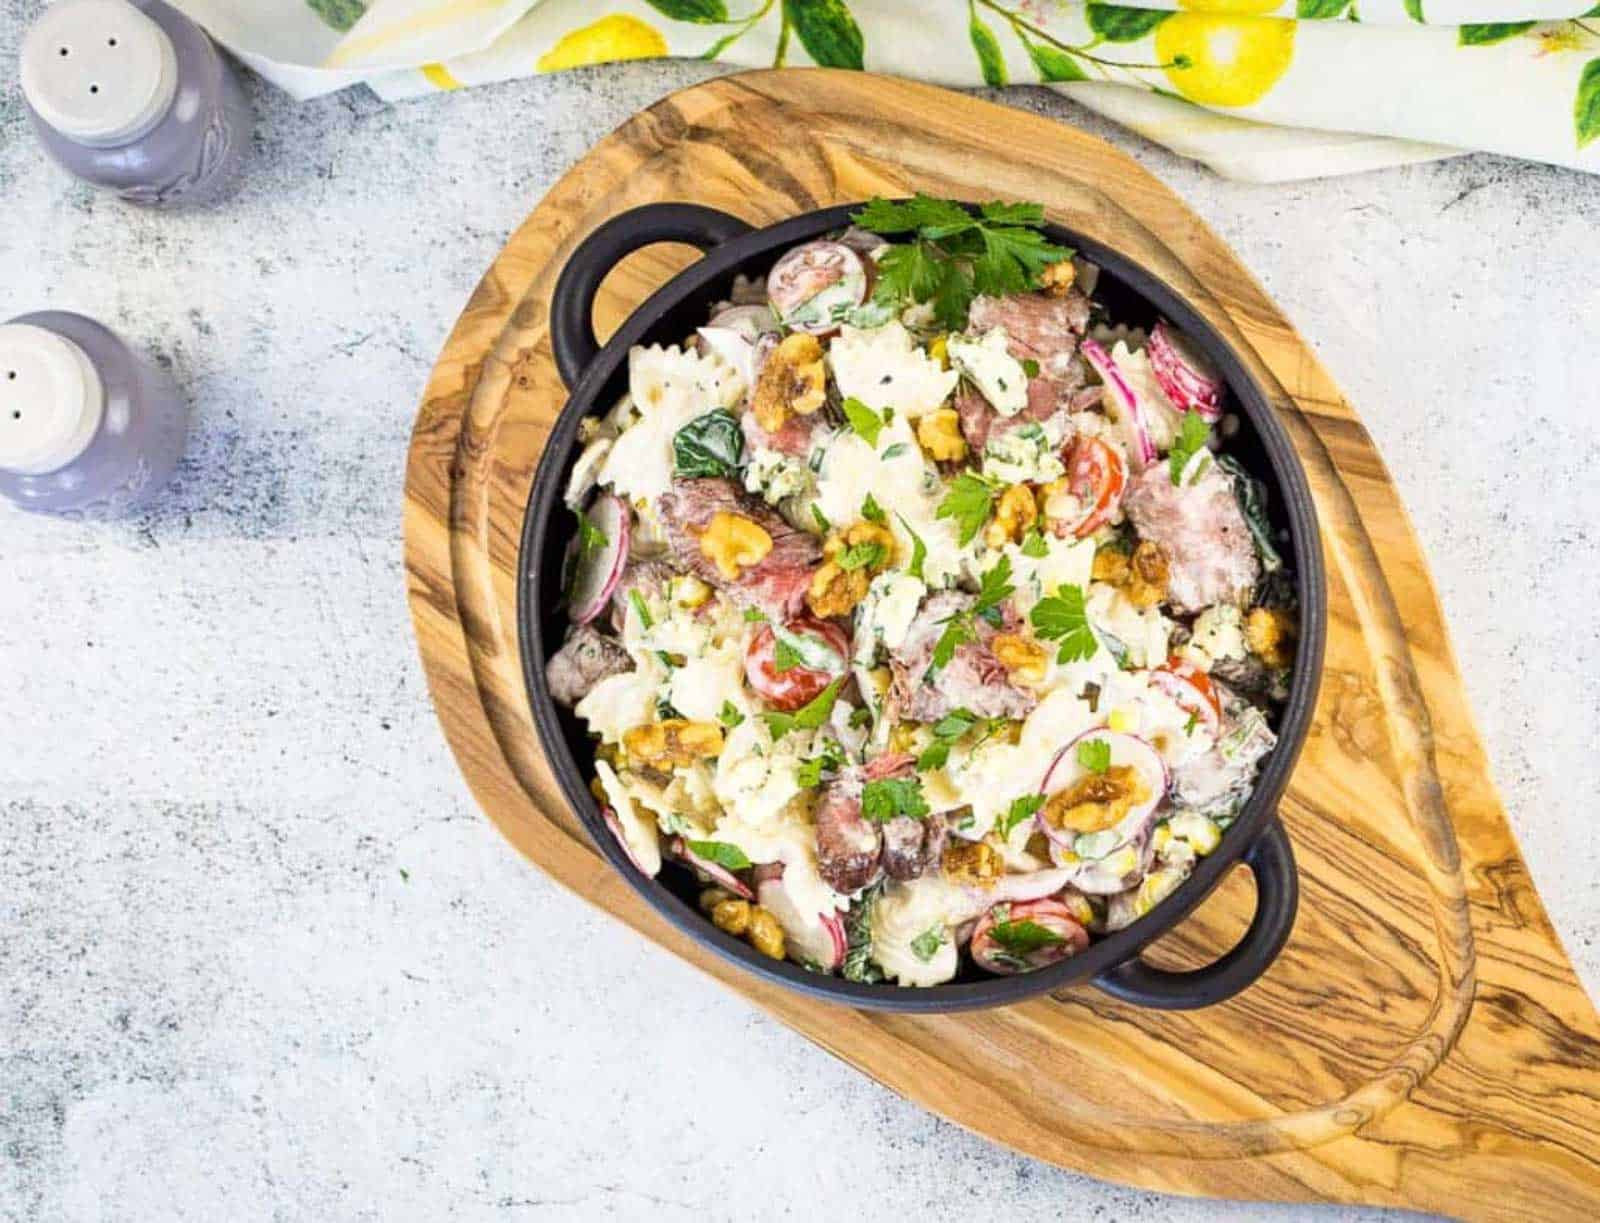 A black bowl filled with a pasta salad containing farfalle, steak slices, radishes, cherry tomatoes, lettuce, nuts, and crumbled blue cheese, garnished with parsley, on a wooden board next to a spoon.